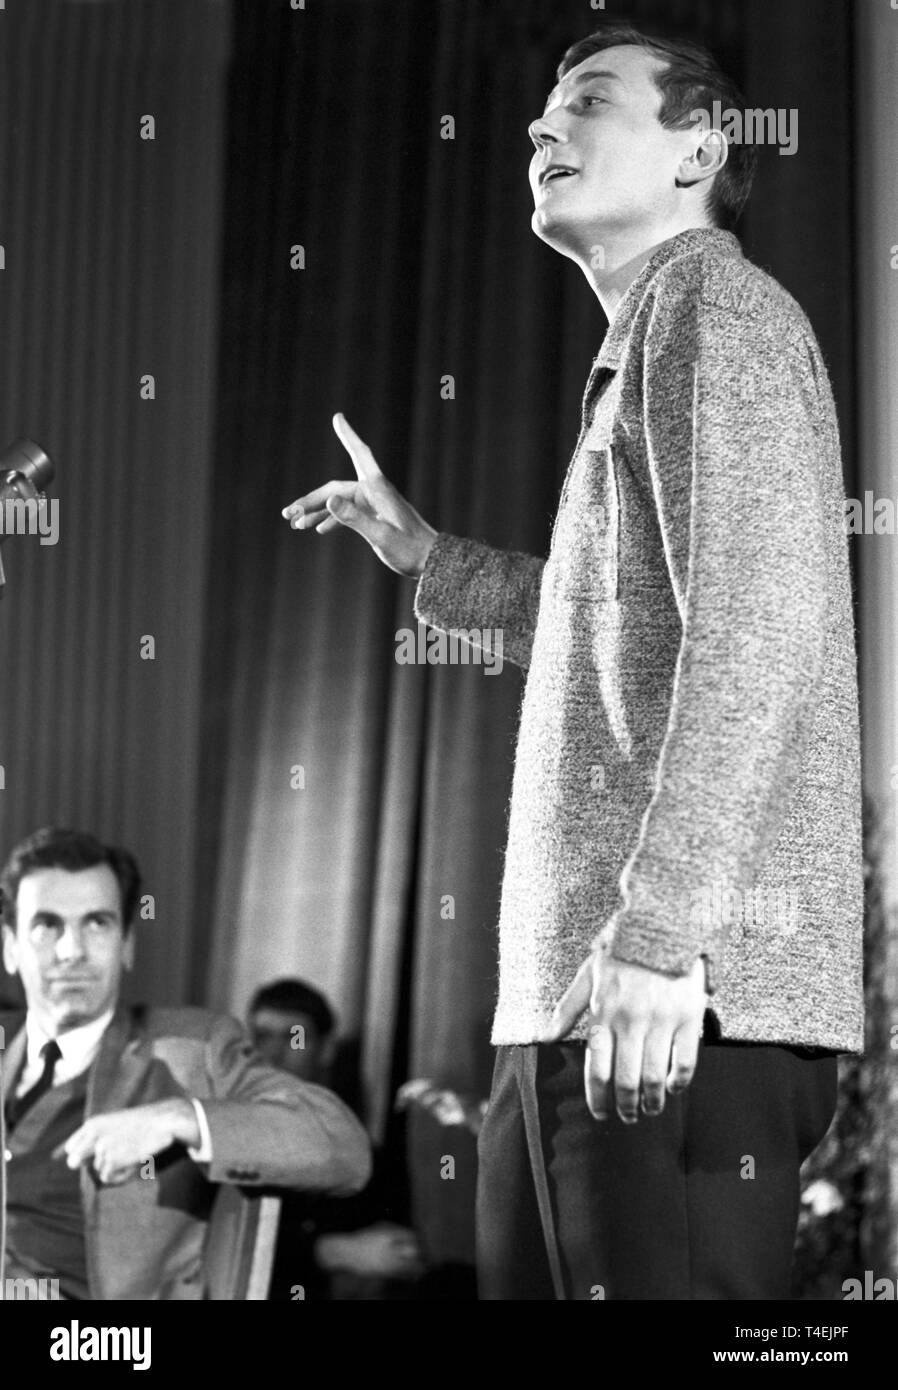 A lecture evening of Russian poet Yevgeny Yevtushenko takes place on the 21st of January in 1963 in Munich. The picture shows Yevgeny Yevtushenko on the podium, in the background Maximilian Schell. | usage worldwide Stock Photo